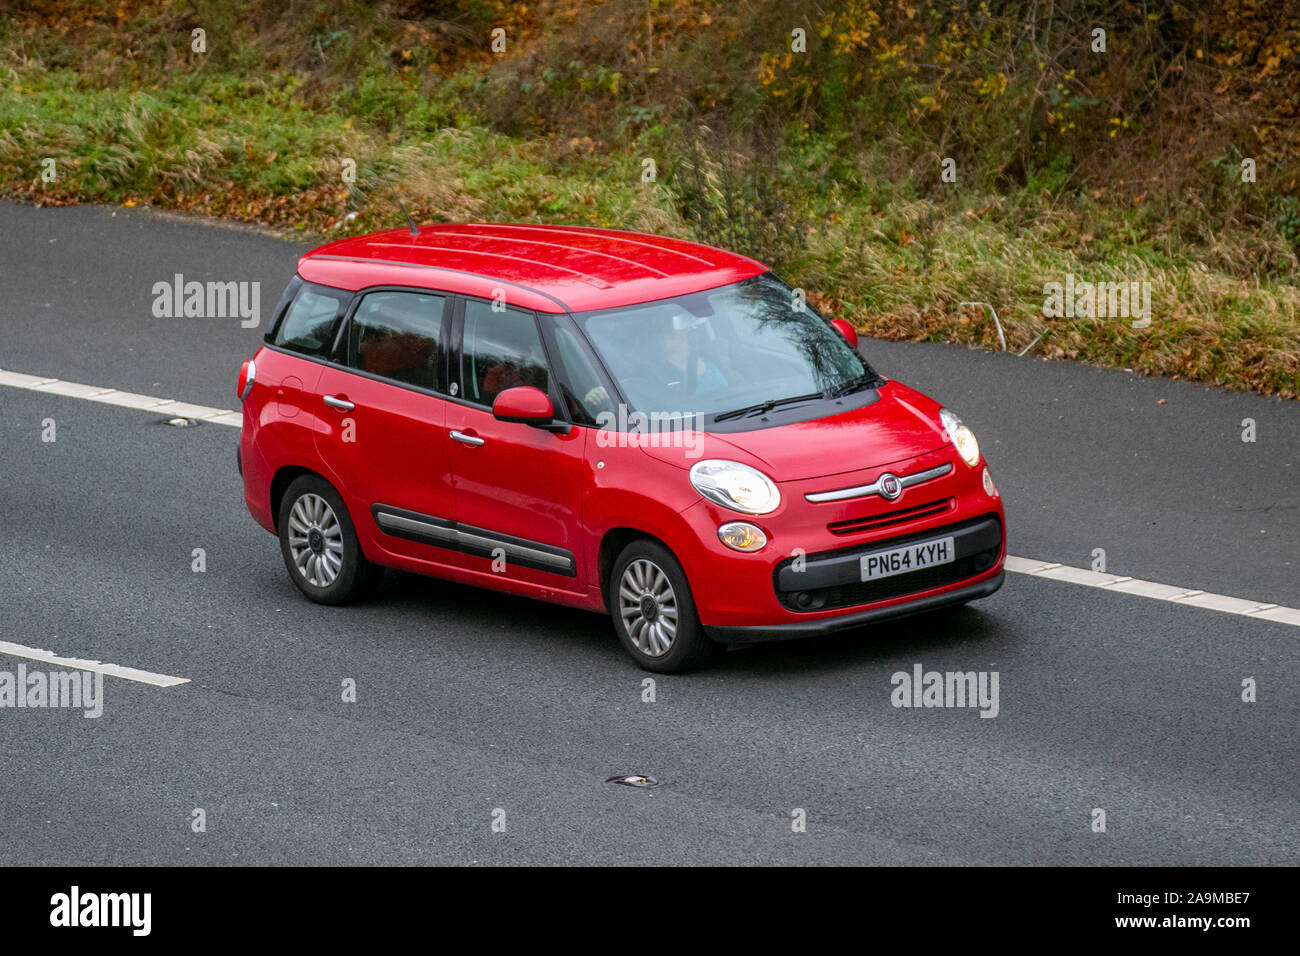 2014 red Fiat 500L MPW POP Star; UK Vehicular traffic, transport, modern vehicles, saloon cars, south-bound on the 3 lane M61 motorway highway. Stock Photo